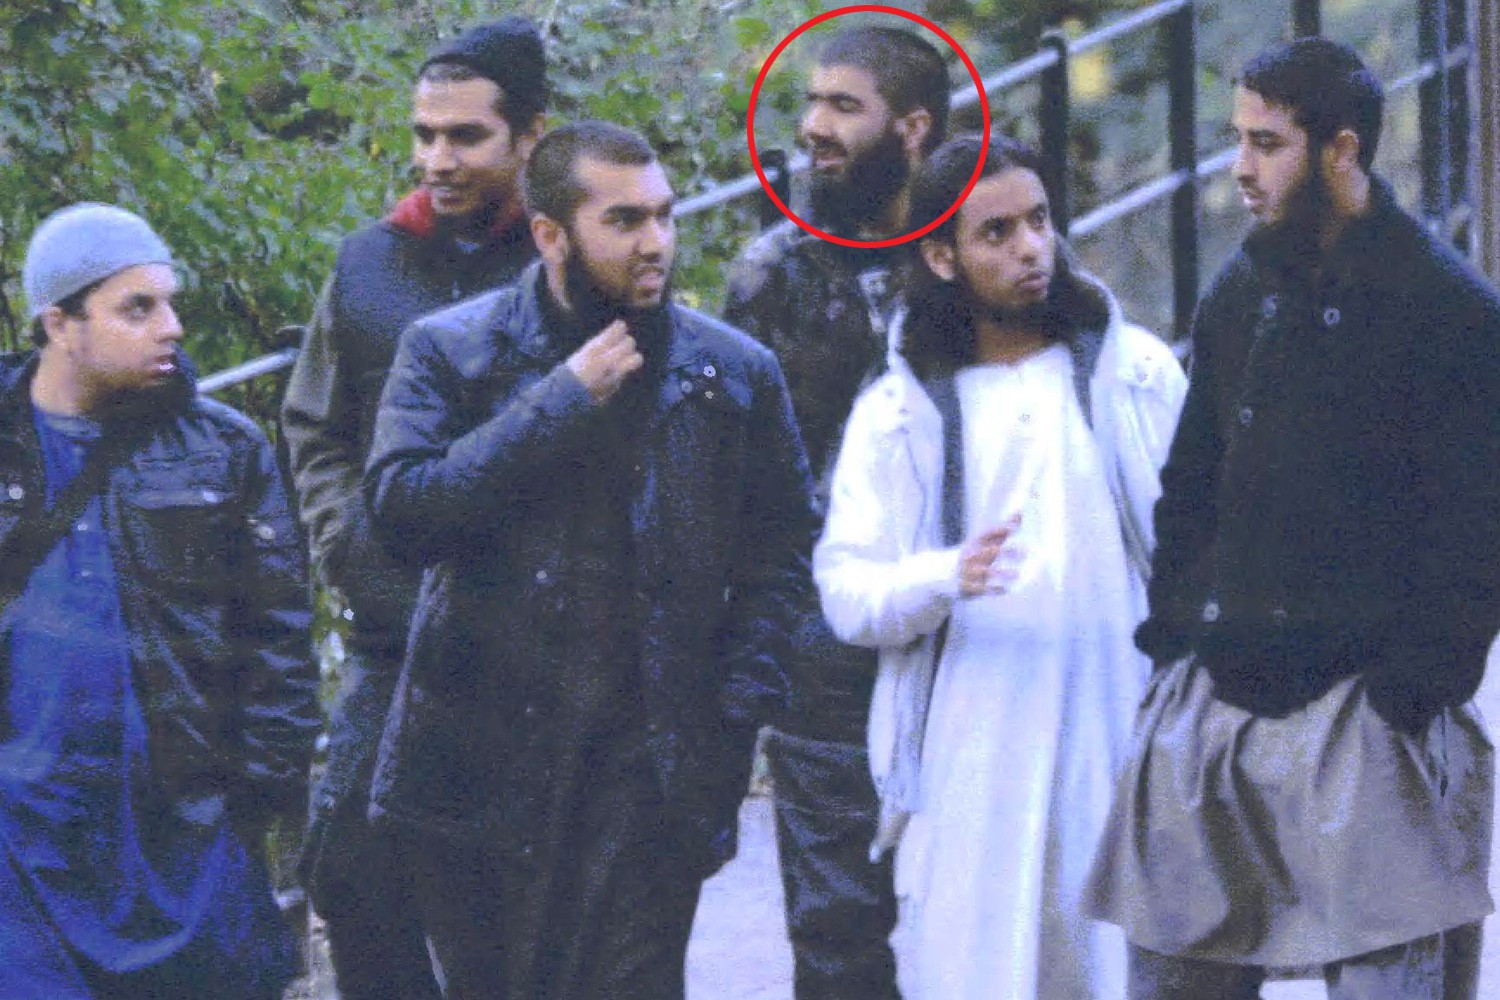 Usman Khan, third from the right, was arrested in 2012 along with his Al Qaeda cell, pictured